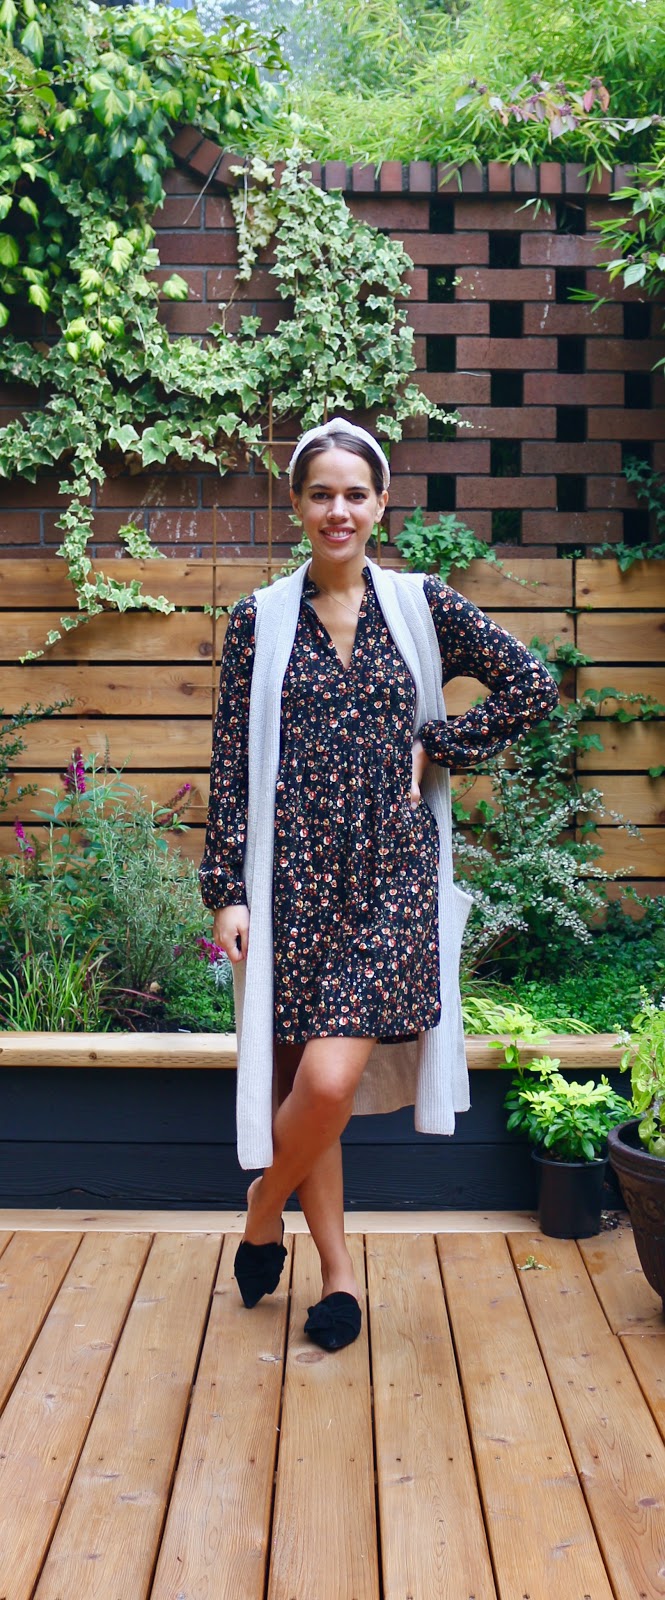 Jules in Flats - Fall Long Sleeve Mini Dress with Duster Vest (Business Casual Workwear on a Budget)